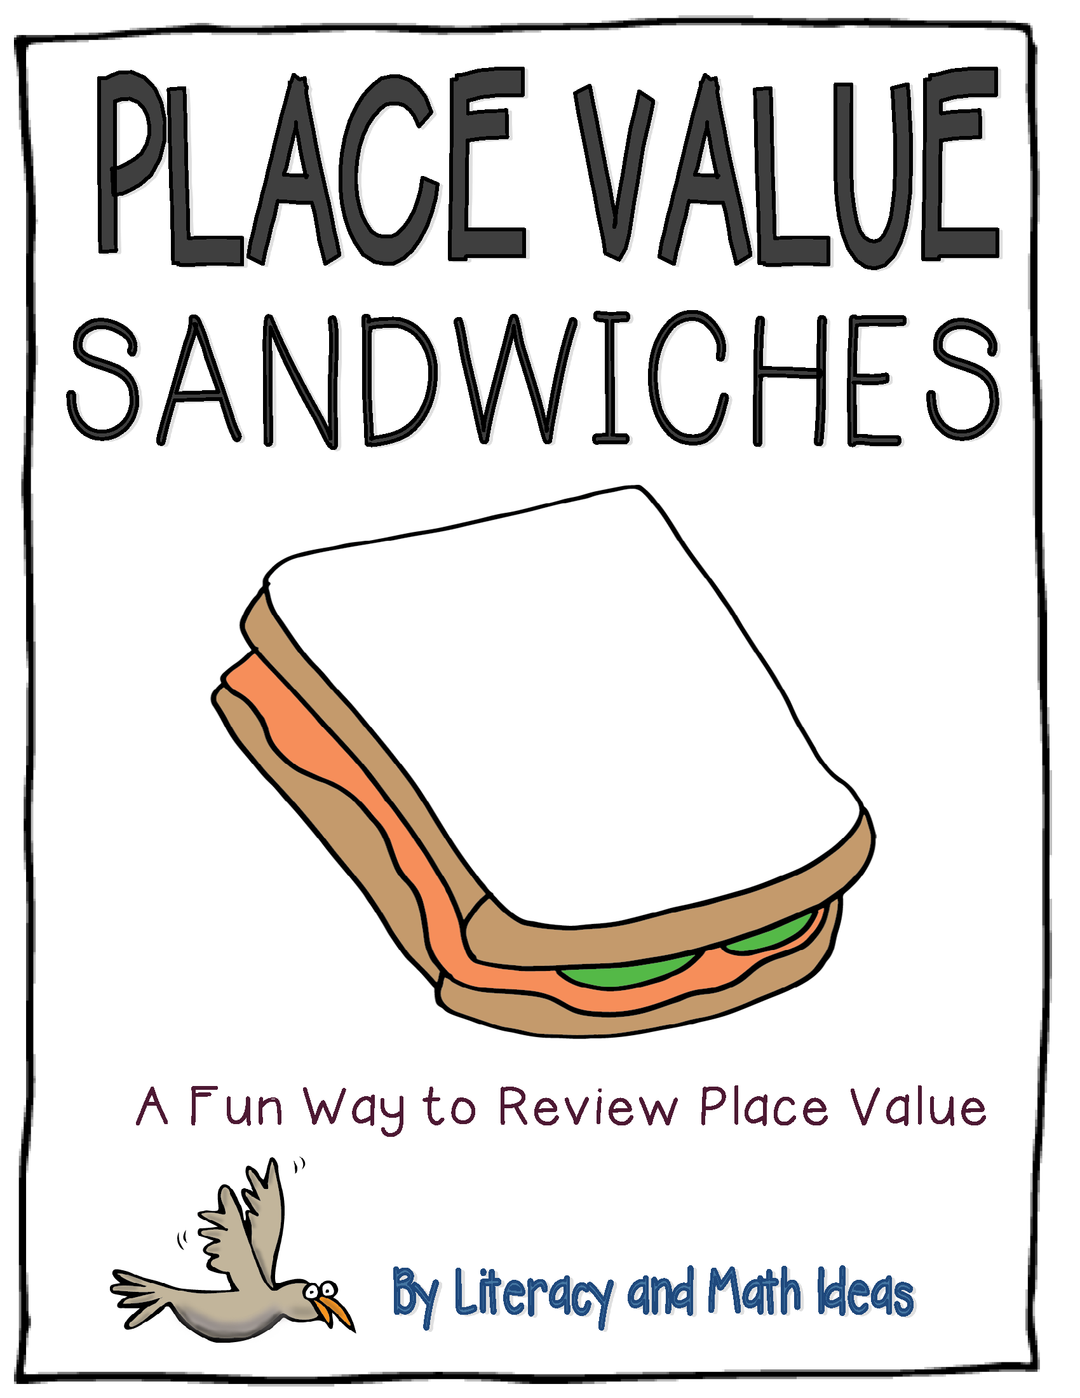 Place Value Sandwiches: Free Place Value Game